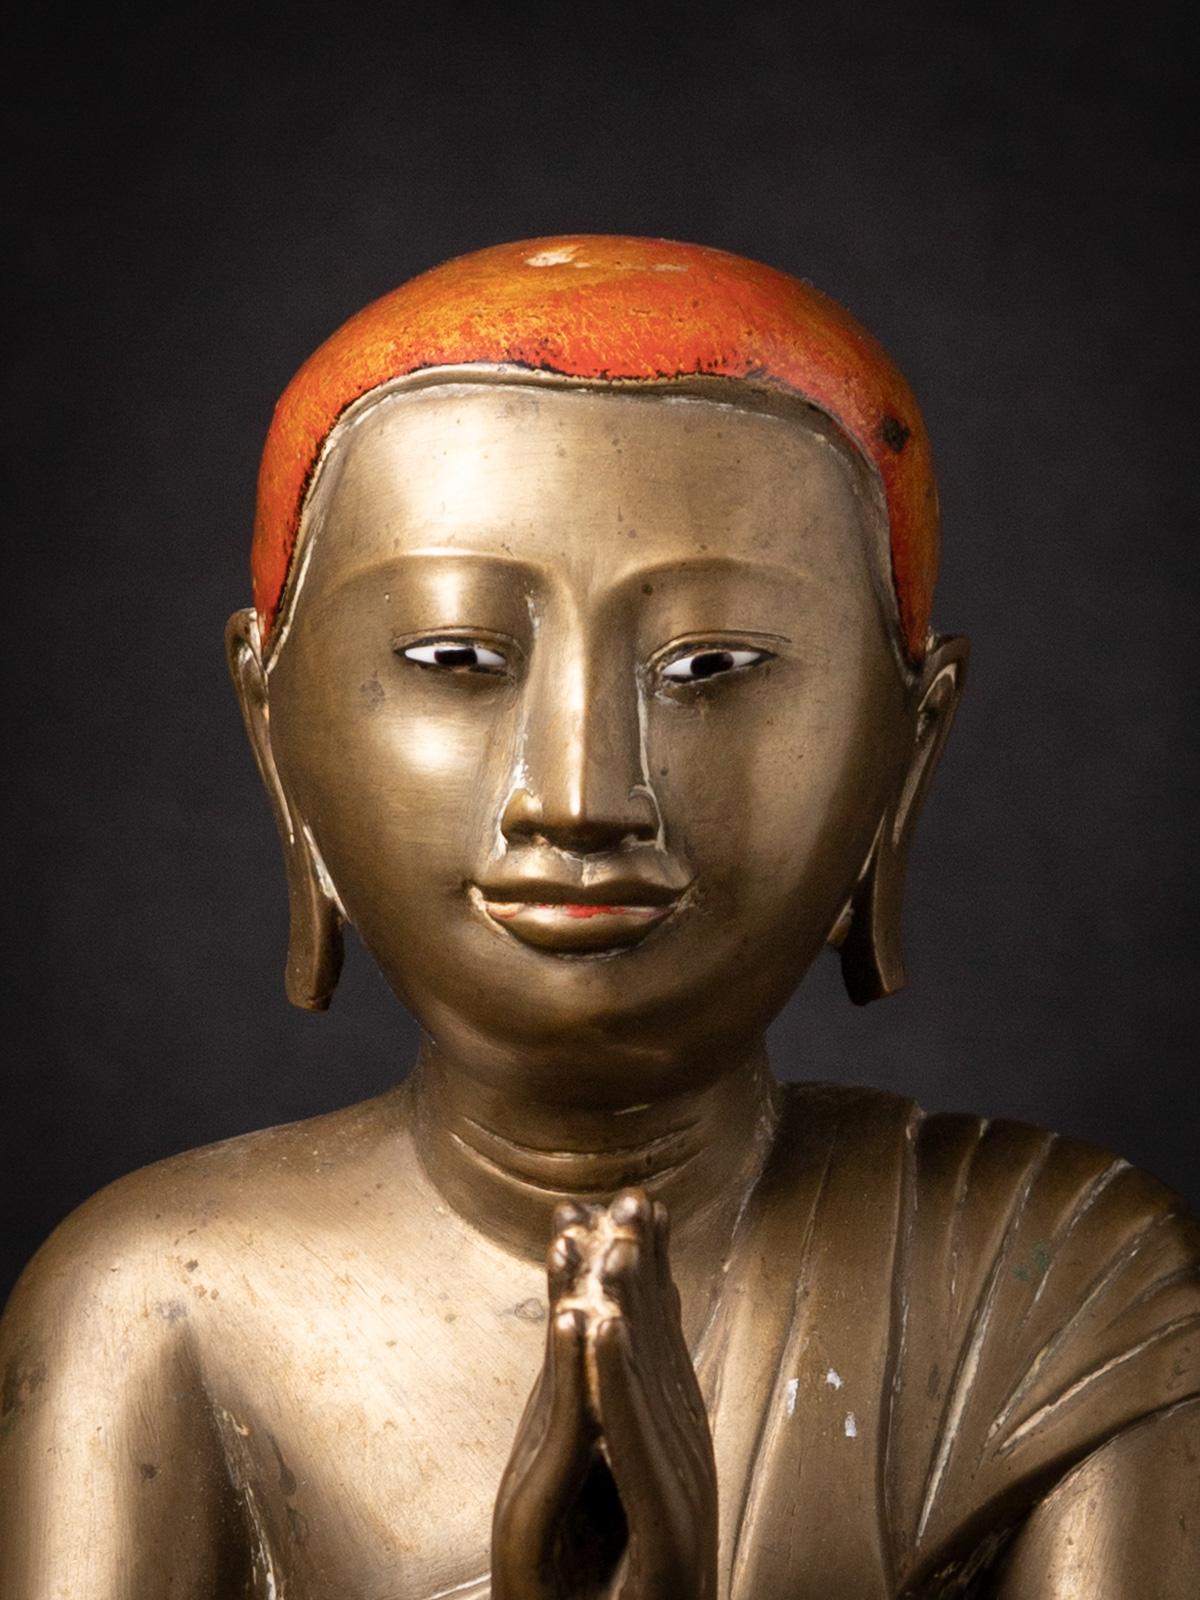 An exquisite Antique bronze Burmese Monk statue, a testament to the artistic traditions of the Shan (Tai Yai) people. Crafted from bronze, this statue stands at 35,5 cm in height, with dimensions of 20,3 cm in width and 25,2cm in depth. The Shan